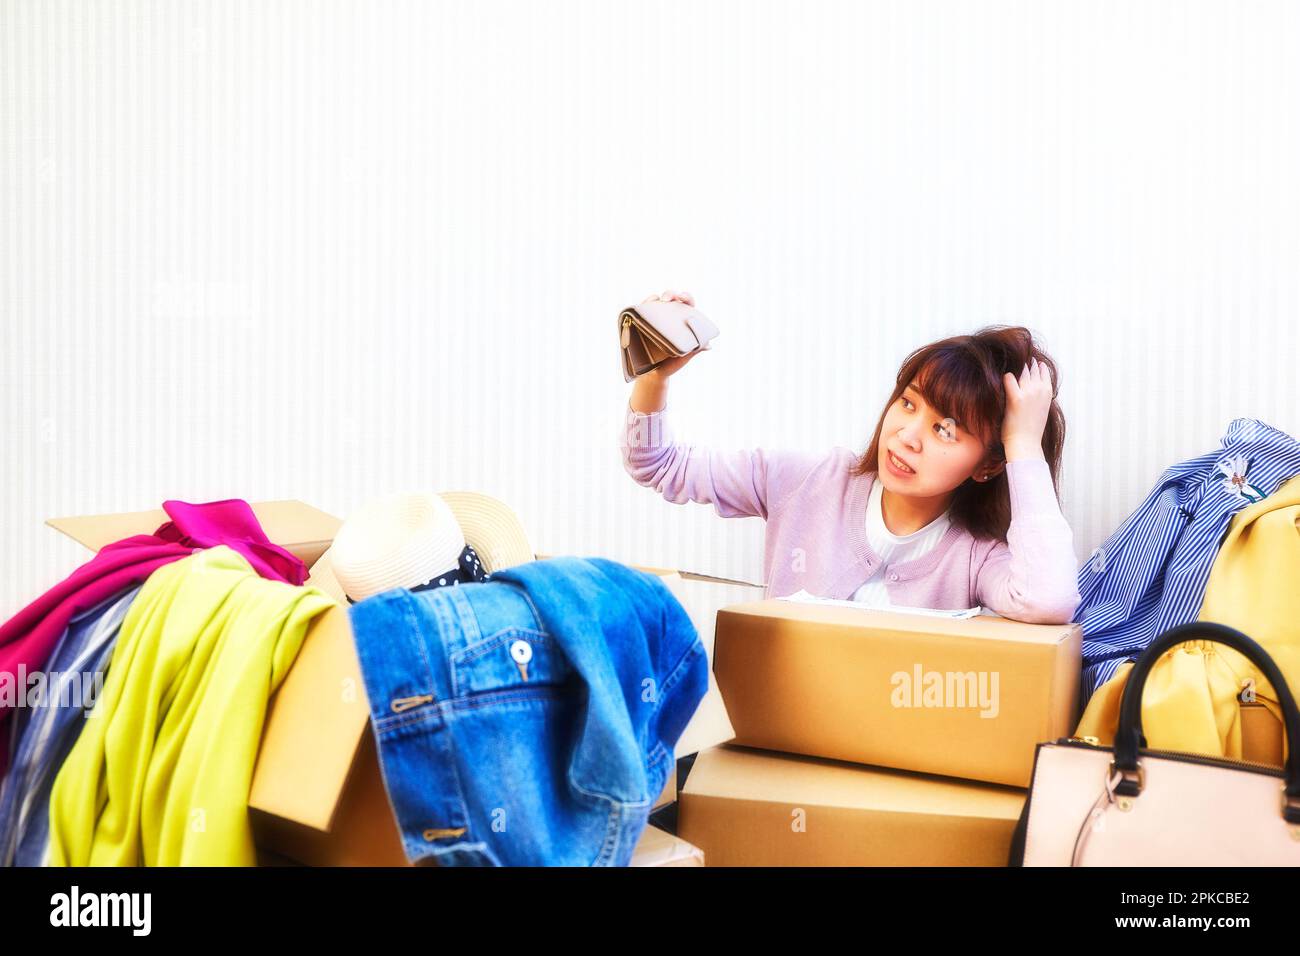 Woman with purse and room cluttered with clothes and bags coming out of boxes Stock Photo